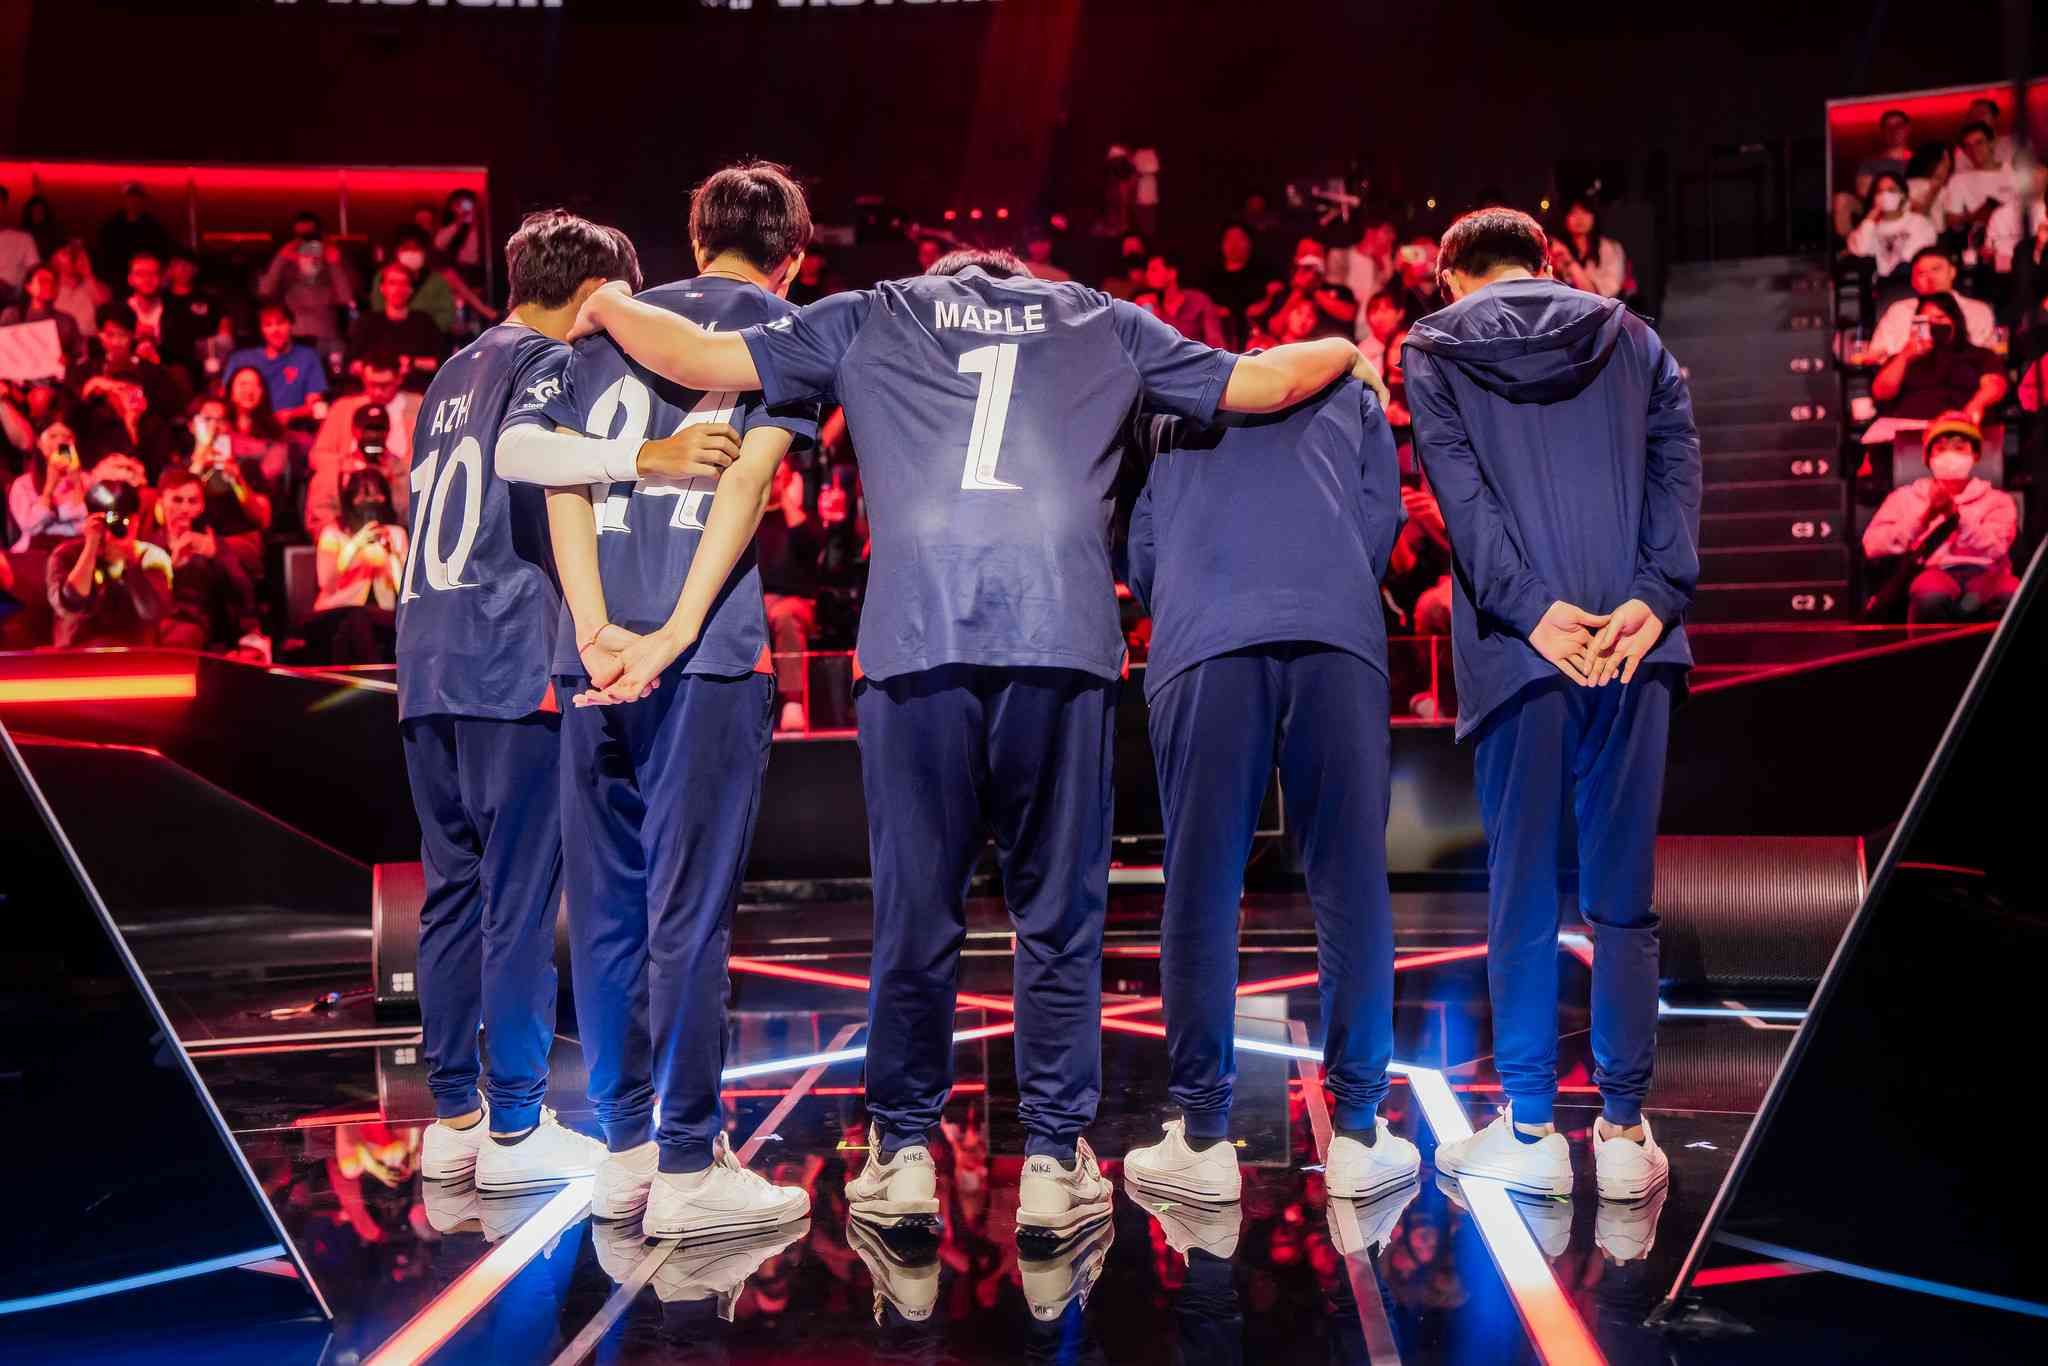 Now back with PSG after a two years in China and NA, Maple hopes to lead his team through the Worlds 2023 Play-In stage (Image Credits: Colin Young-Wolff/Riot Games)